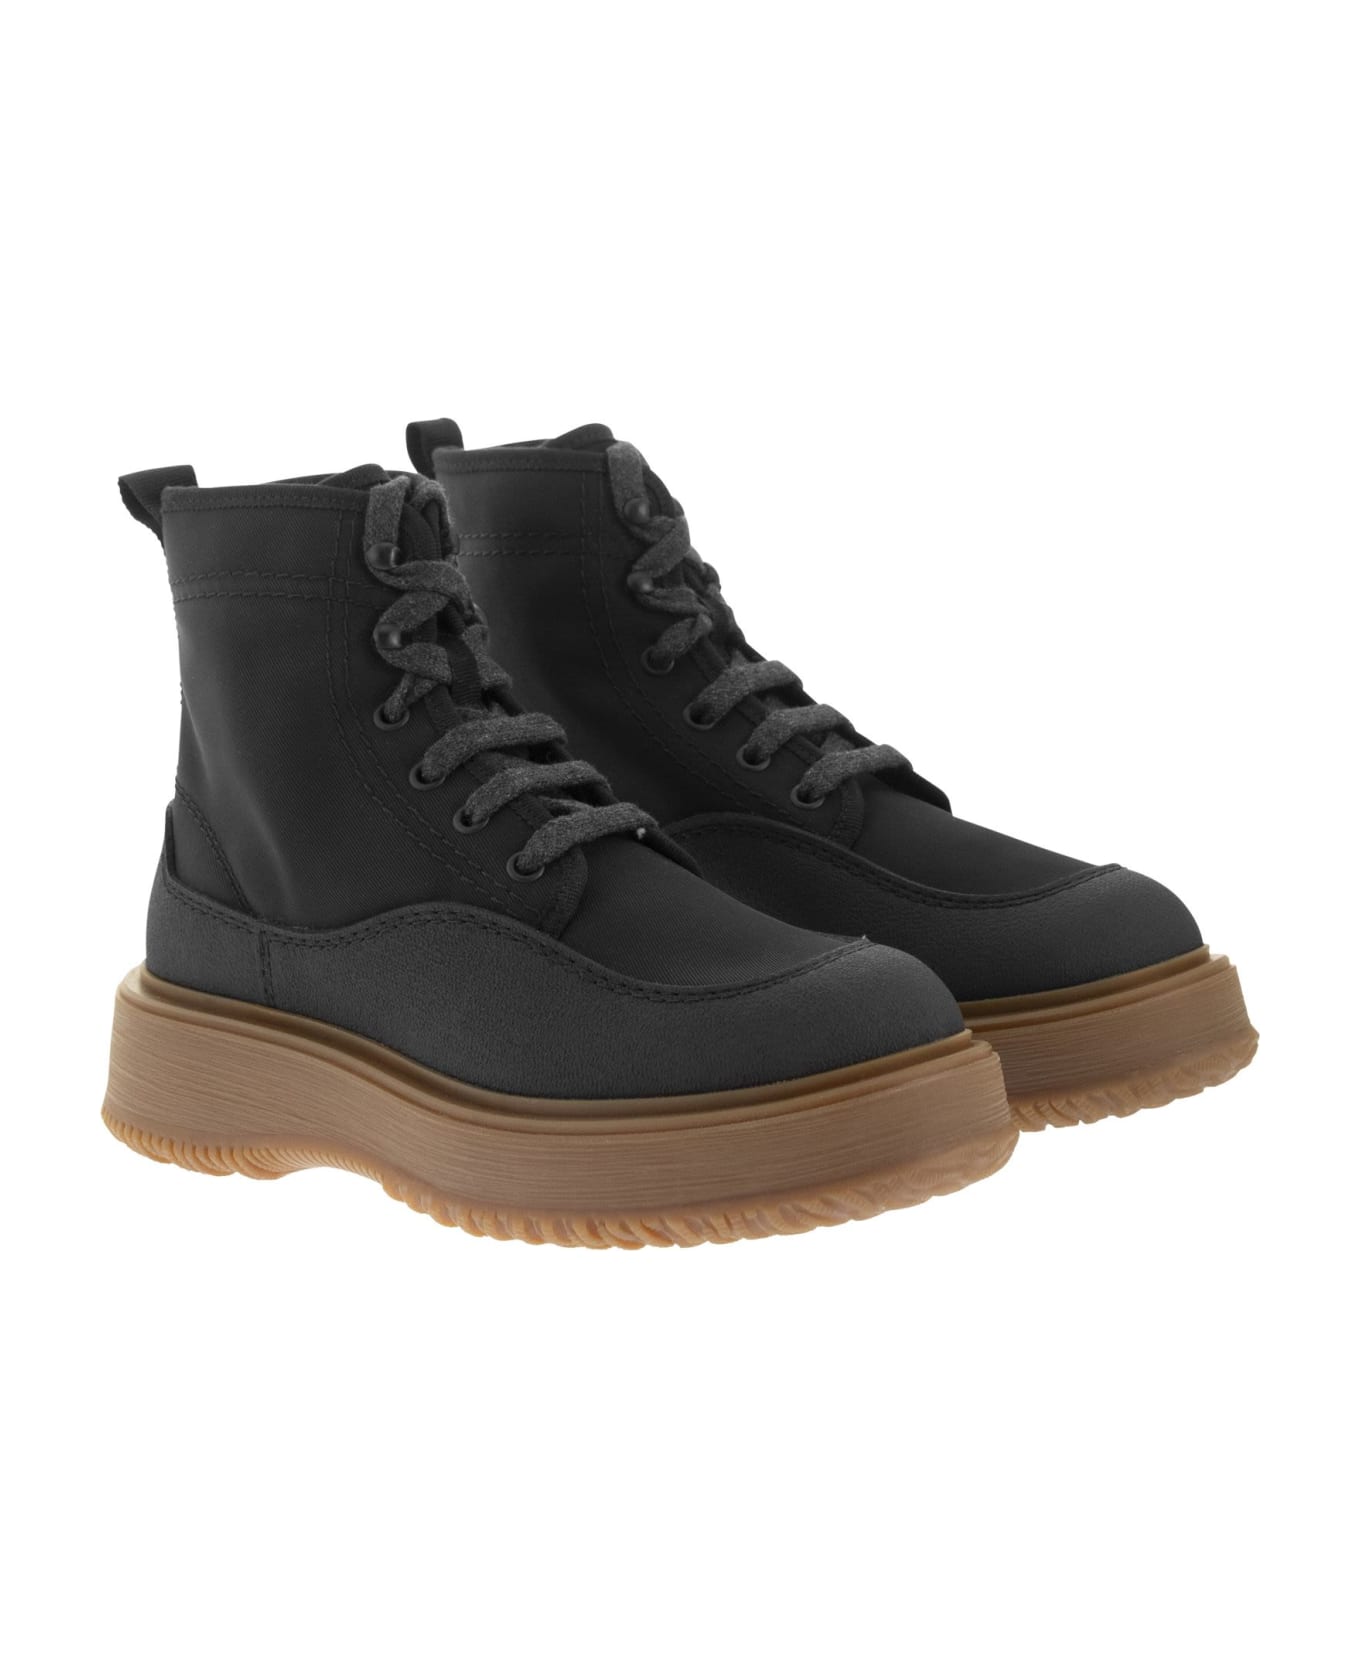 Hogan Untraditional - Laced Boot - Black